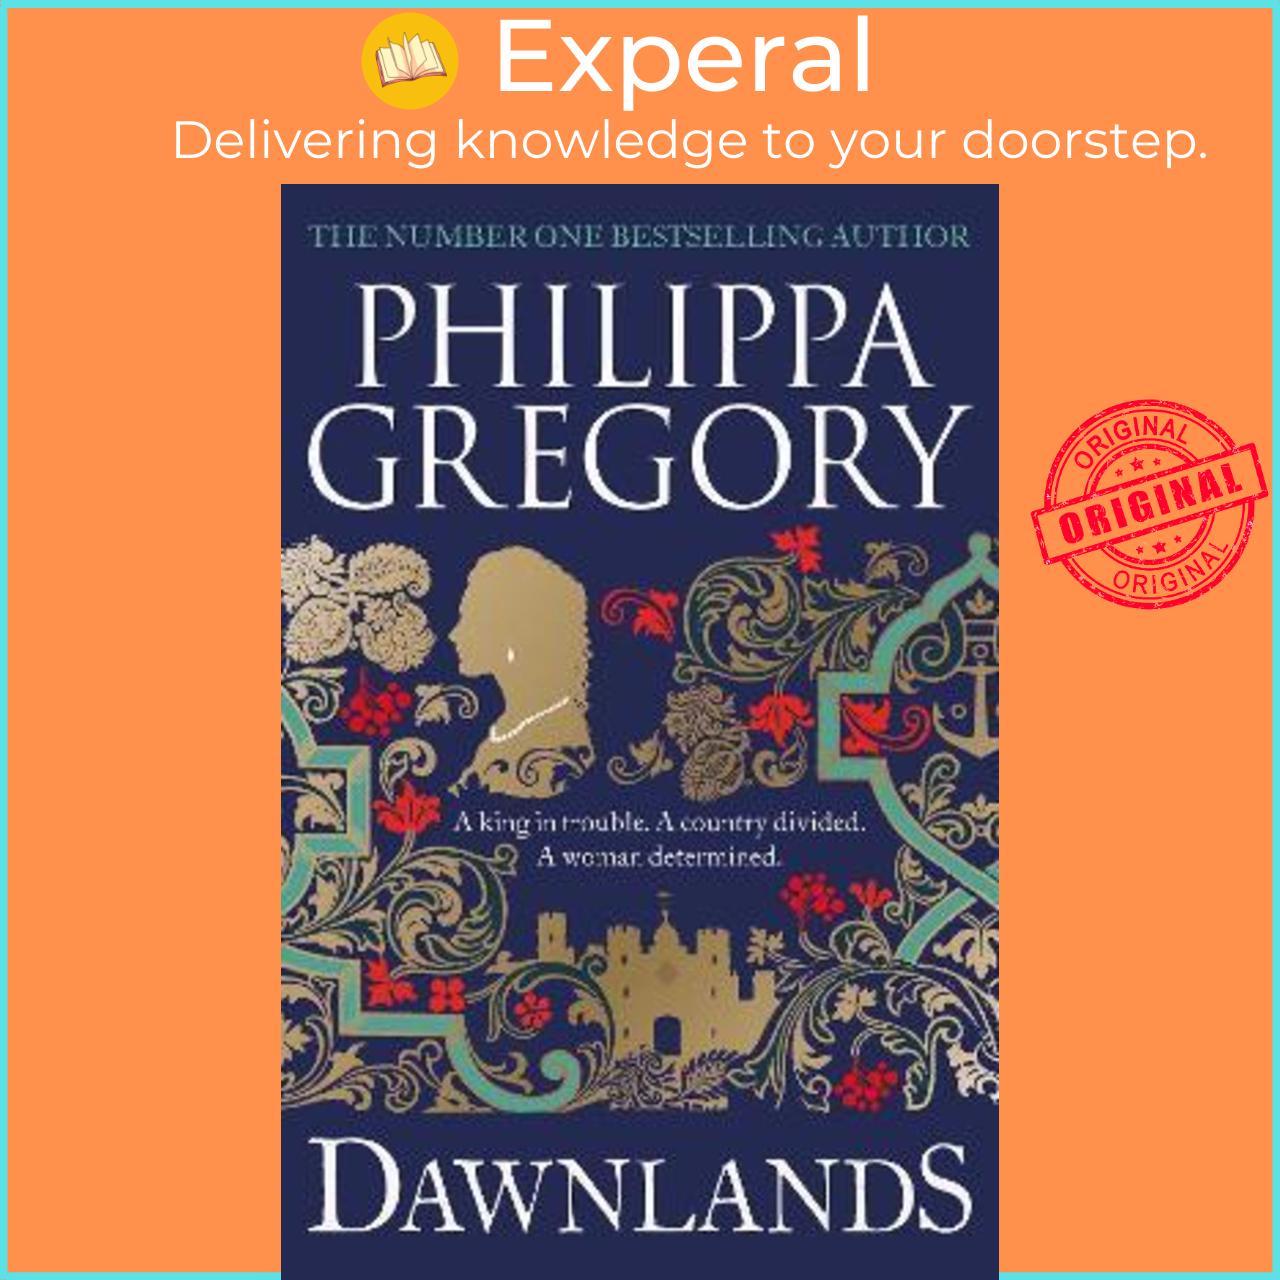 Sách - Dawnlands : the number one bestselling author of vivid stories crafte by Philippa Gregory (UK edition, hardcover)